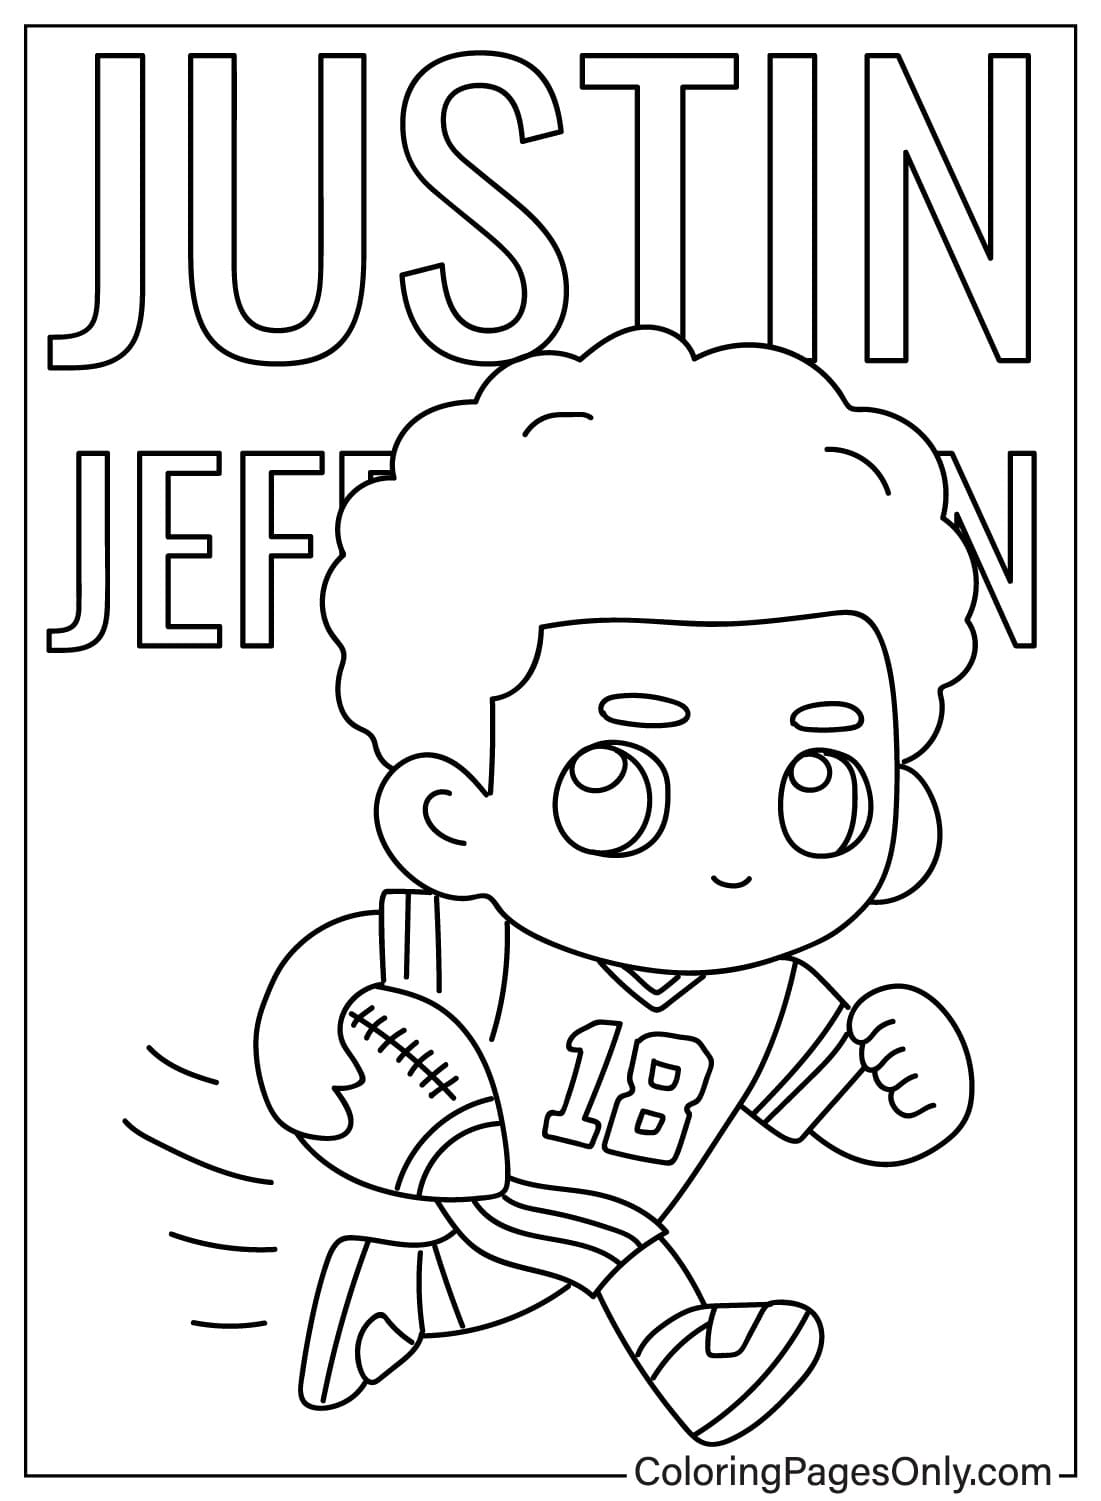 Chibi Justin Jefferson Coloring Page from Justin Jefferson